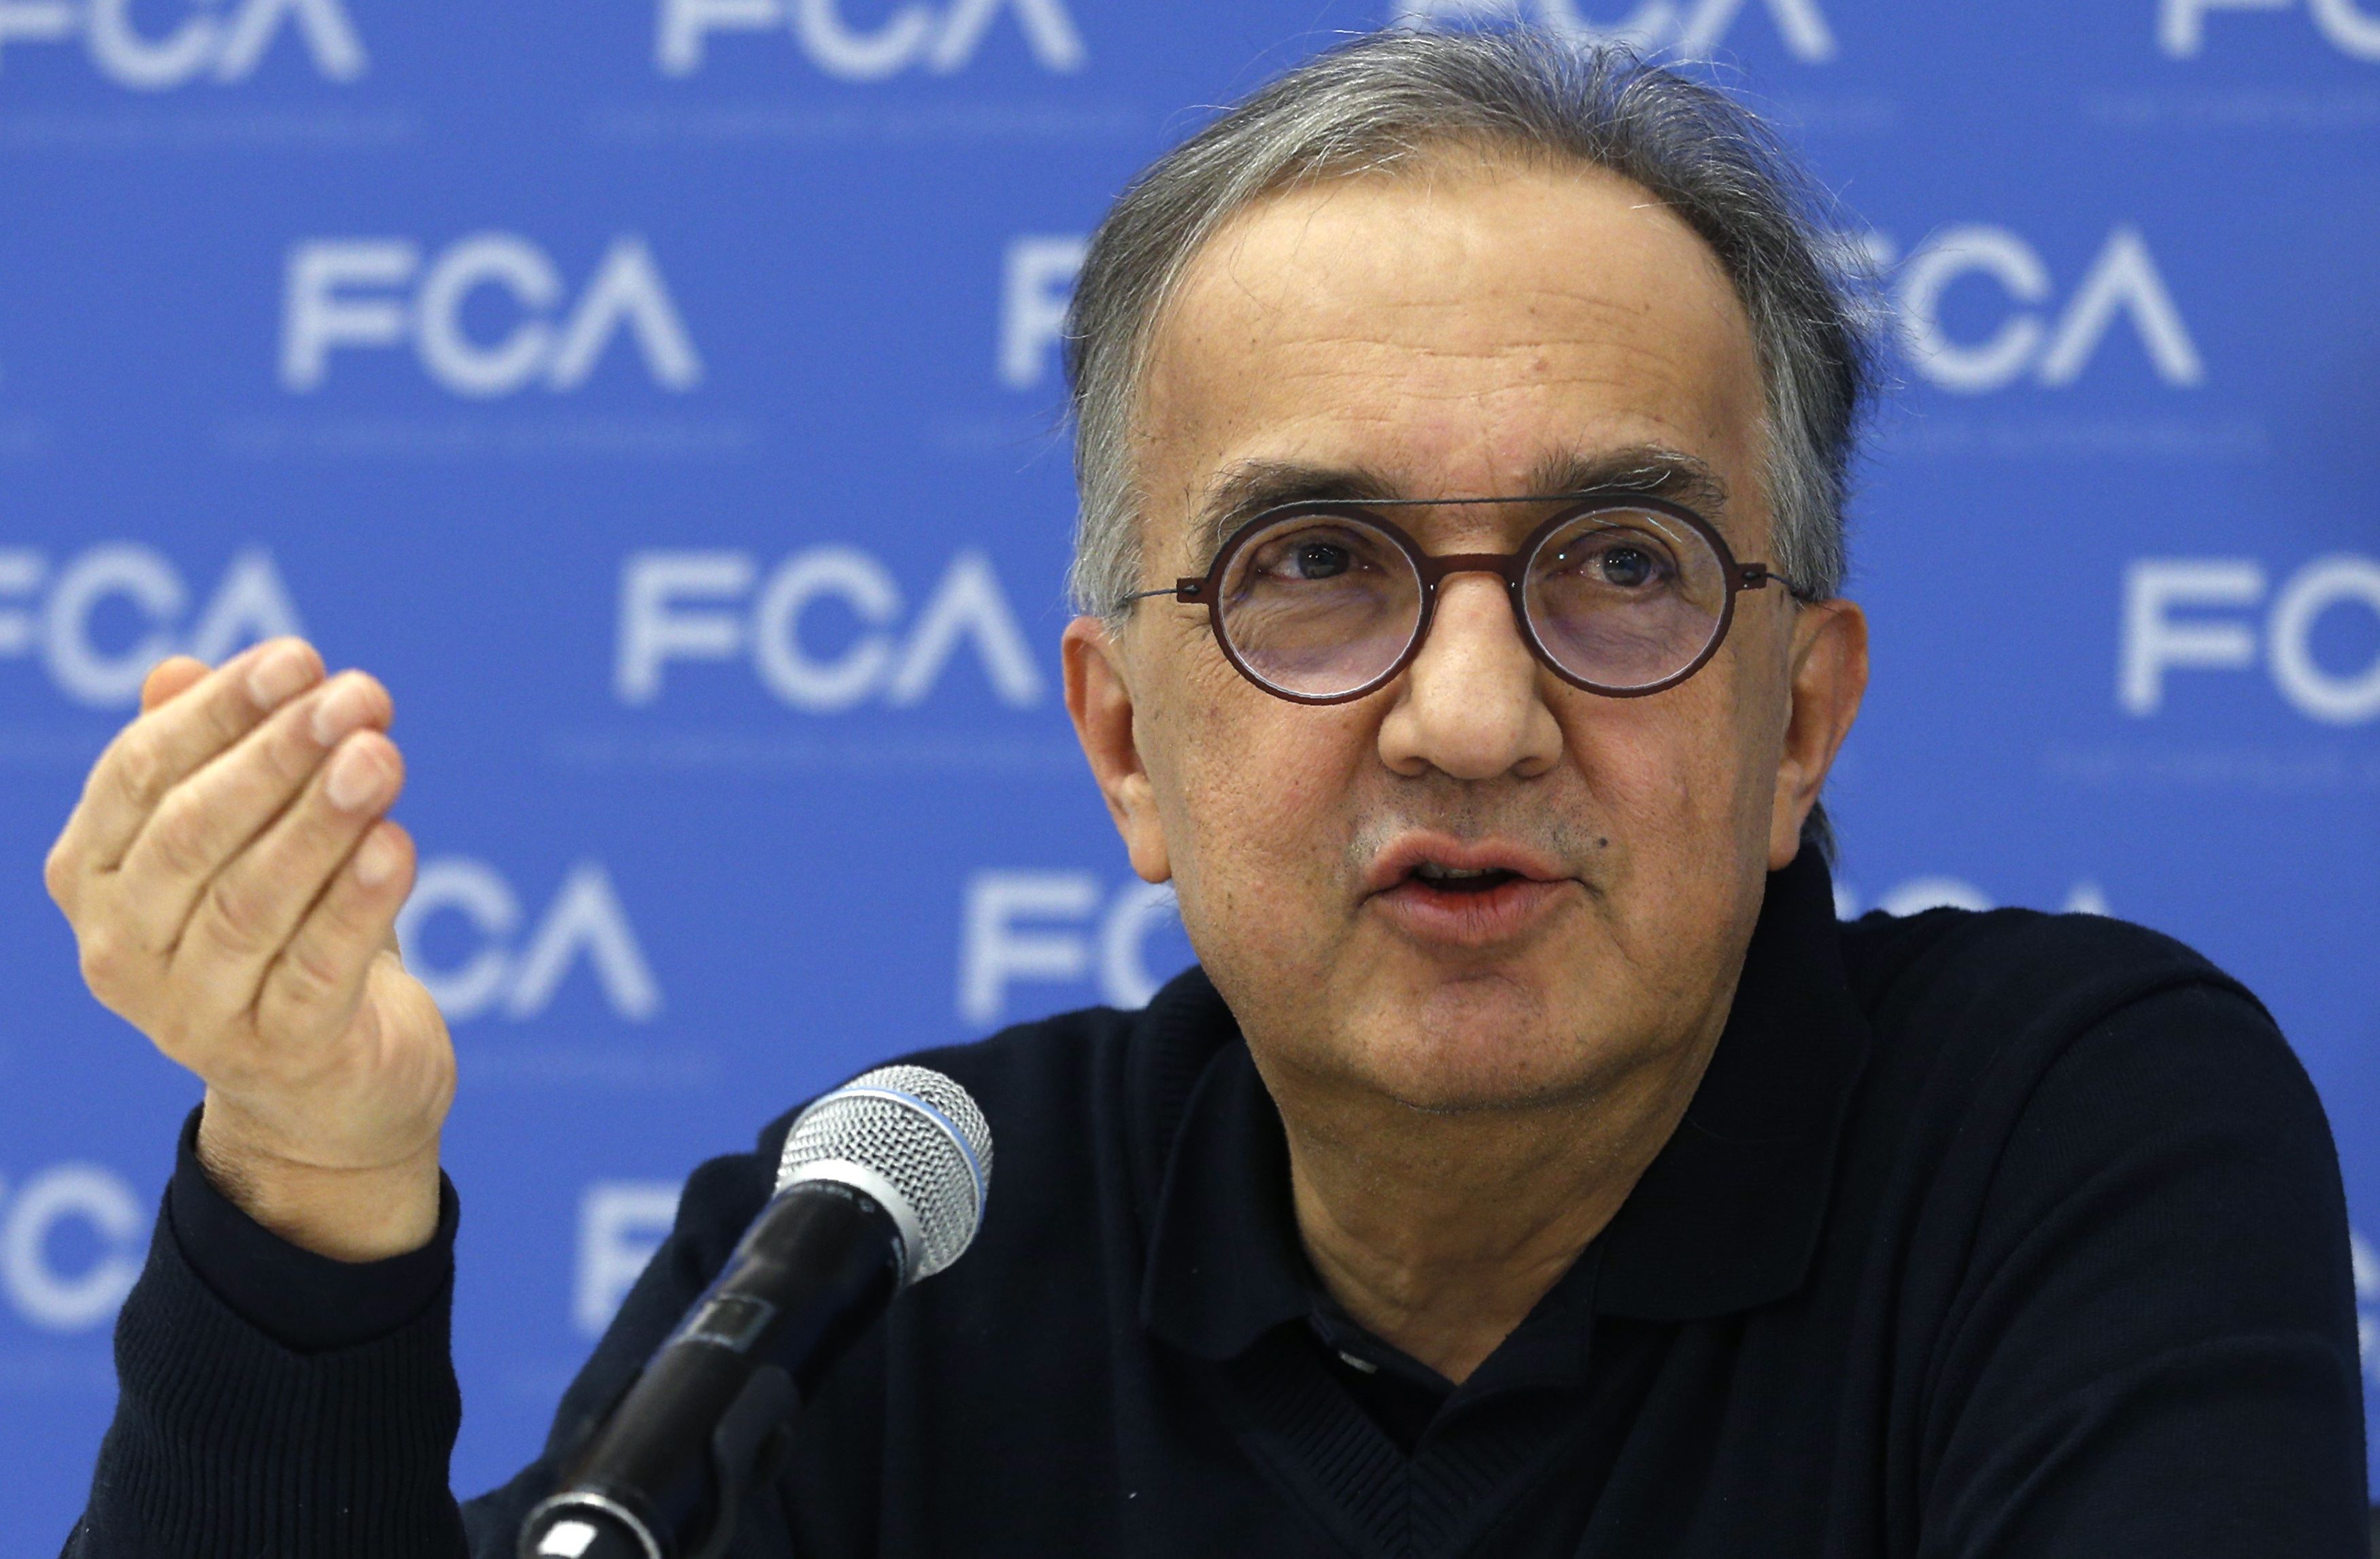 Fiat Chrysler CEO says no plans to sell brands to Chinese